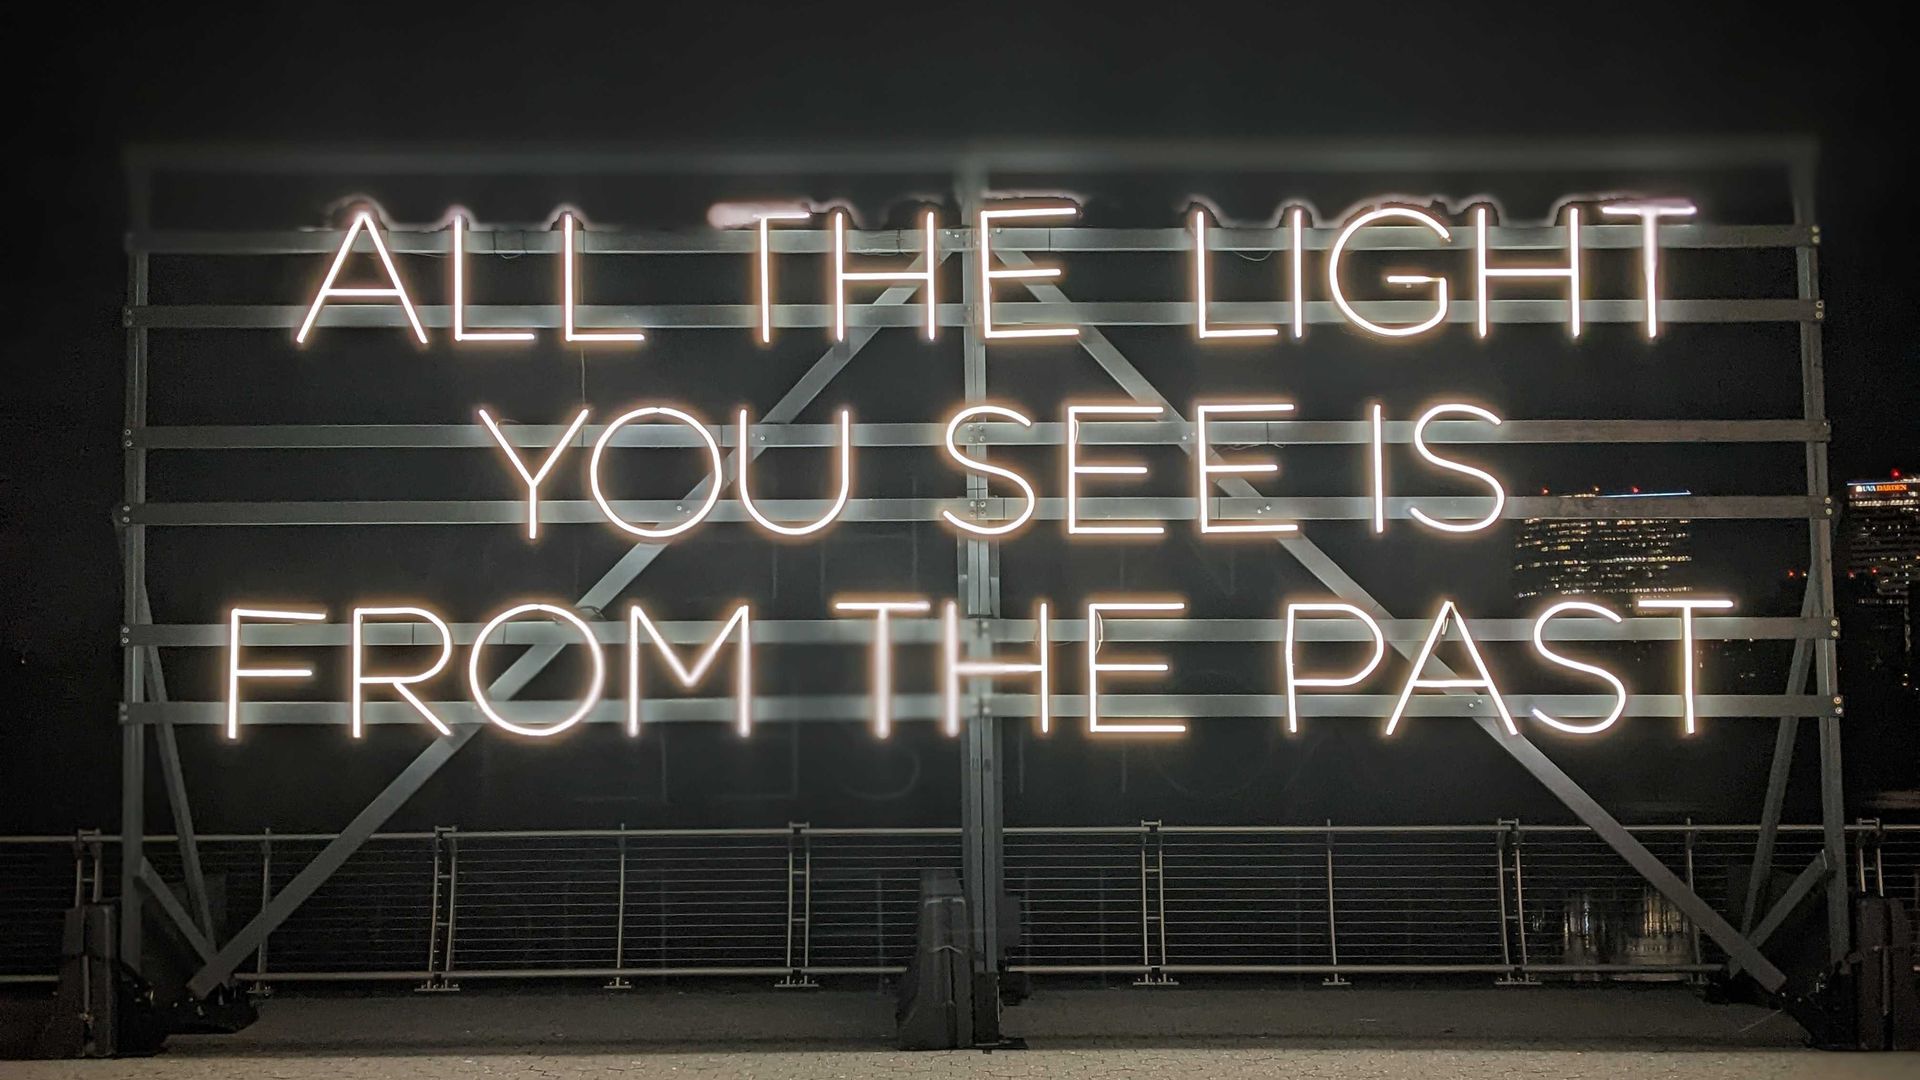 An art illustration using yellow neon saying "all the light you see is from the past"